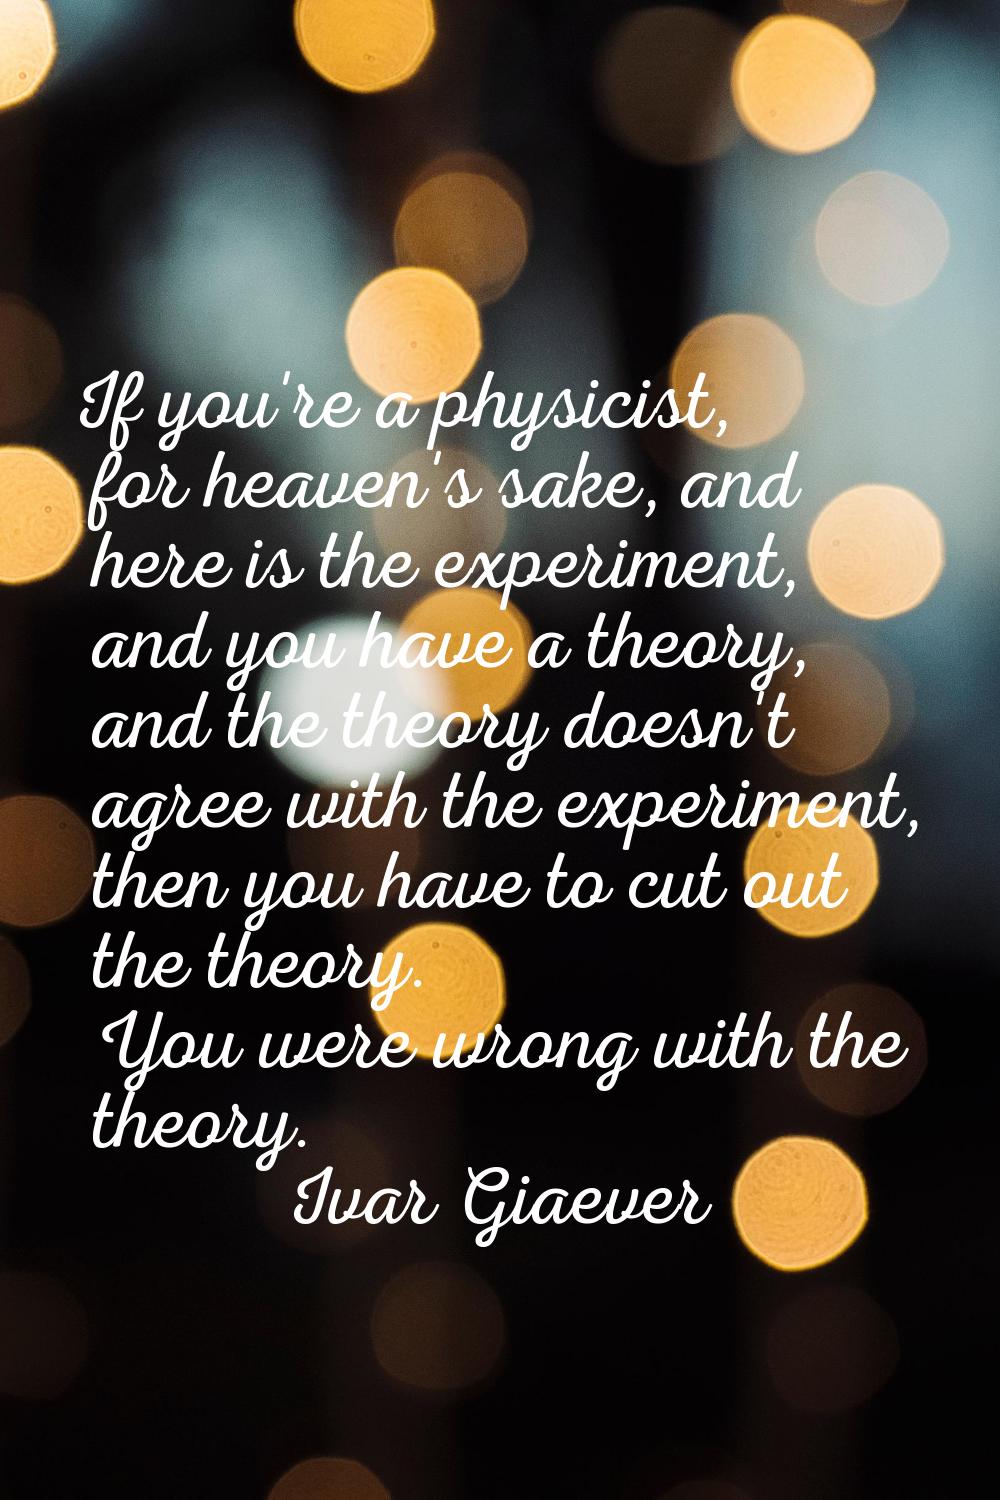 If you're a physicist, for heaven's sake, and here is the experiment, and you have a theory, and th